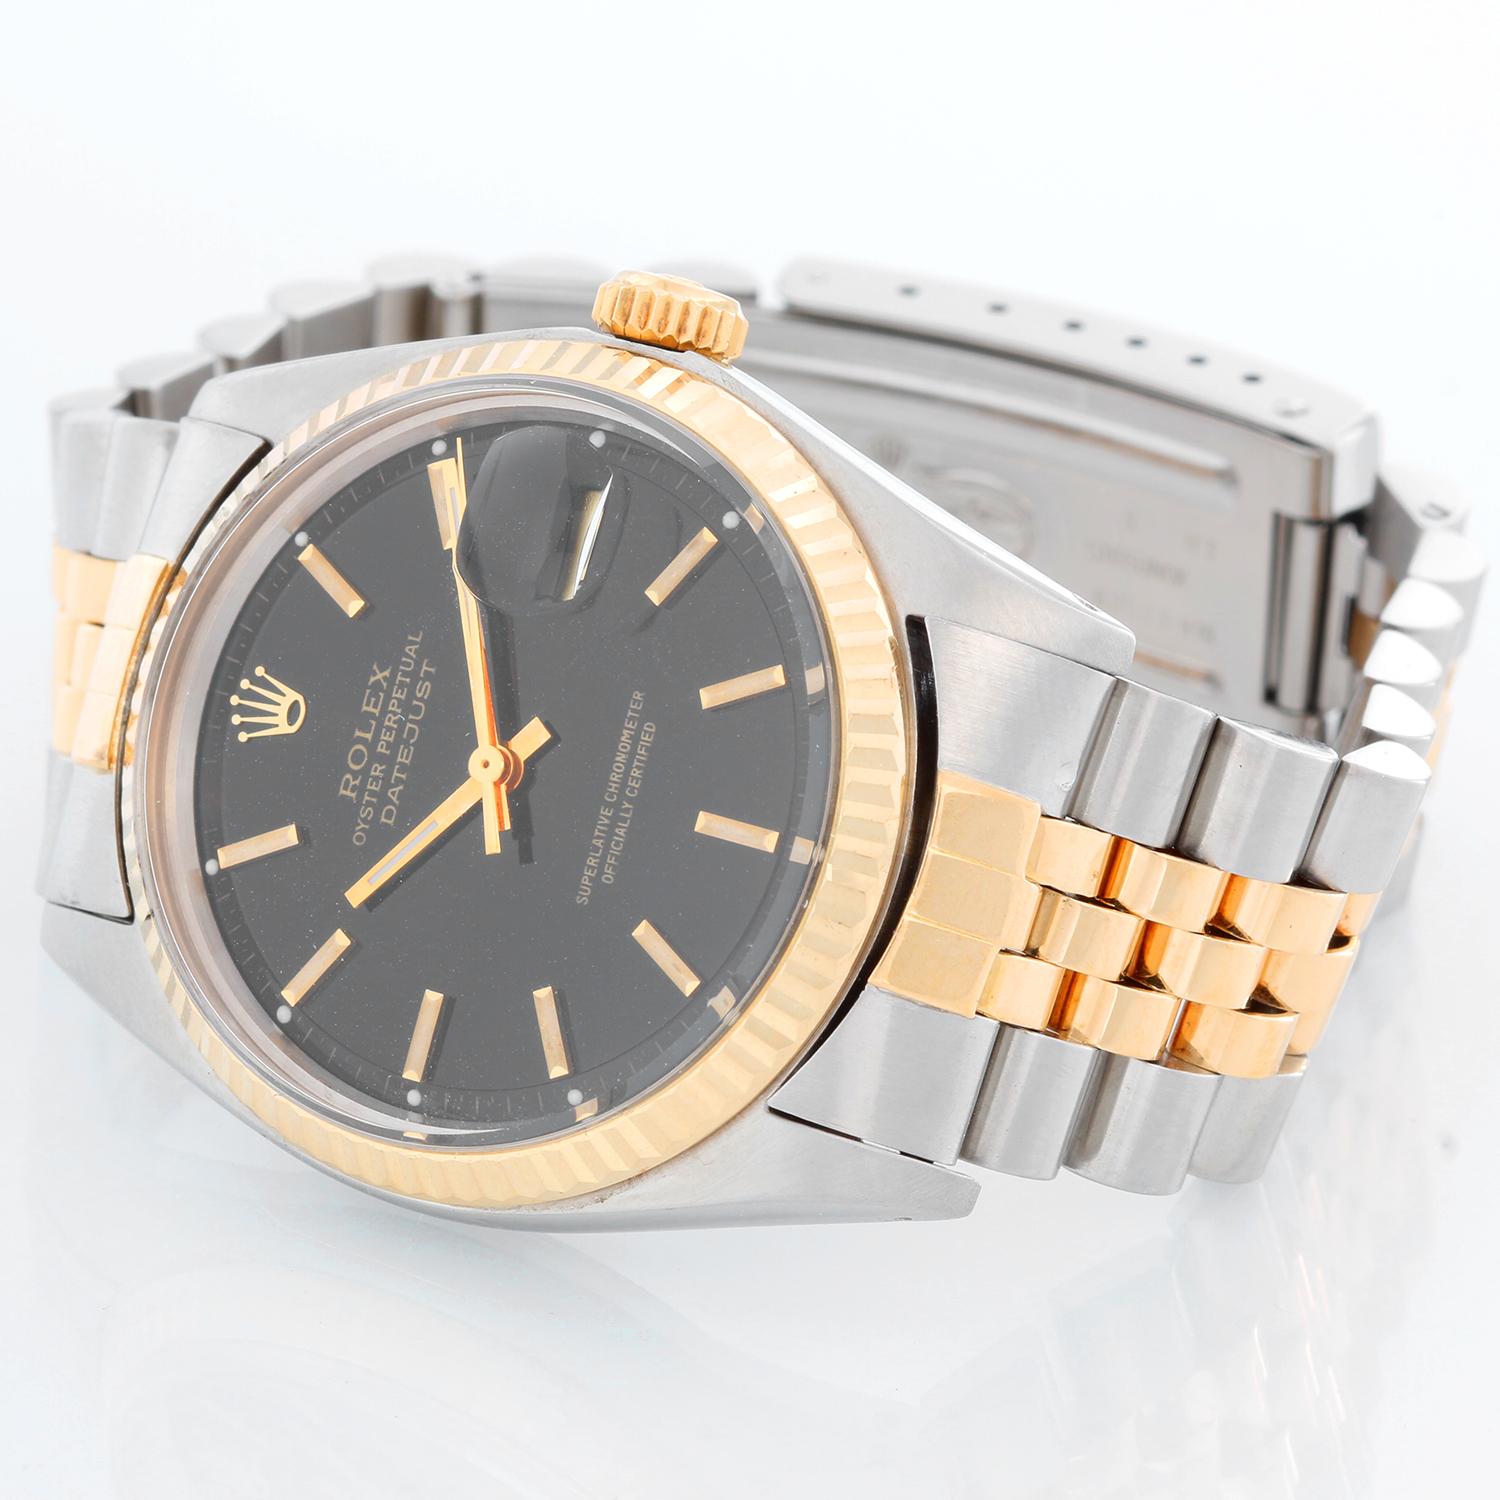 Men's Rolex Datejust 2-Tone Watch 1601 - Automatic winding, 27 jewels, Quickset, acrylic crystal. Stainless steel and 18k yellow gold fluted bezel ( 36 mm ). Black dial. Two tone jubilee bracelet . Pre-owned with custom box. 